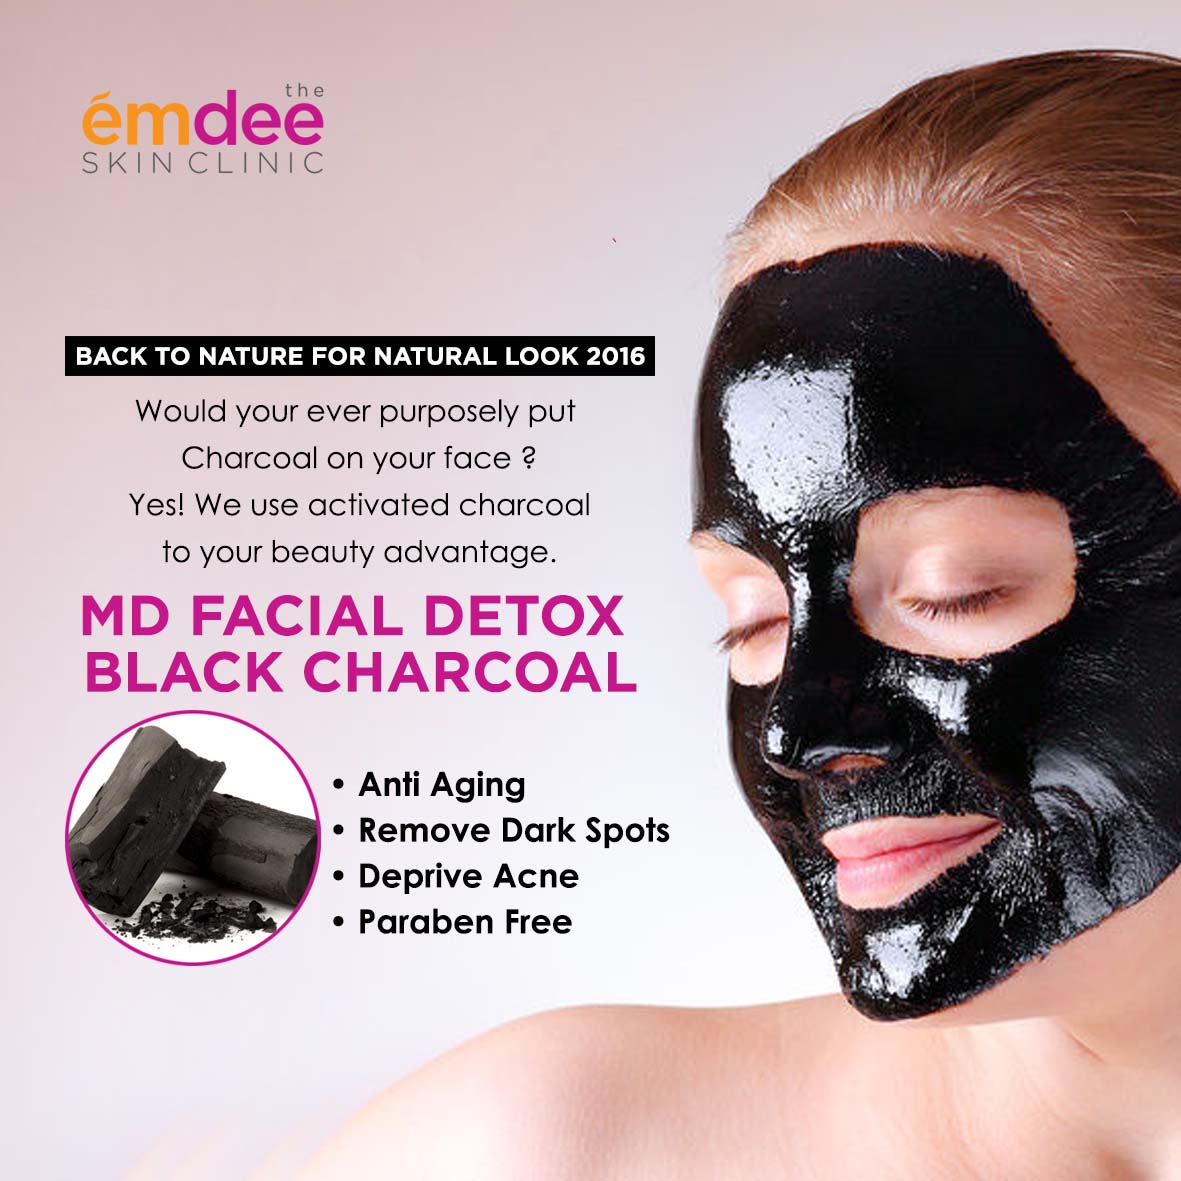 The Emdee Skin Clinic Luncurkan Treatment Back to Nature for Natural Look 2016